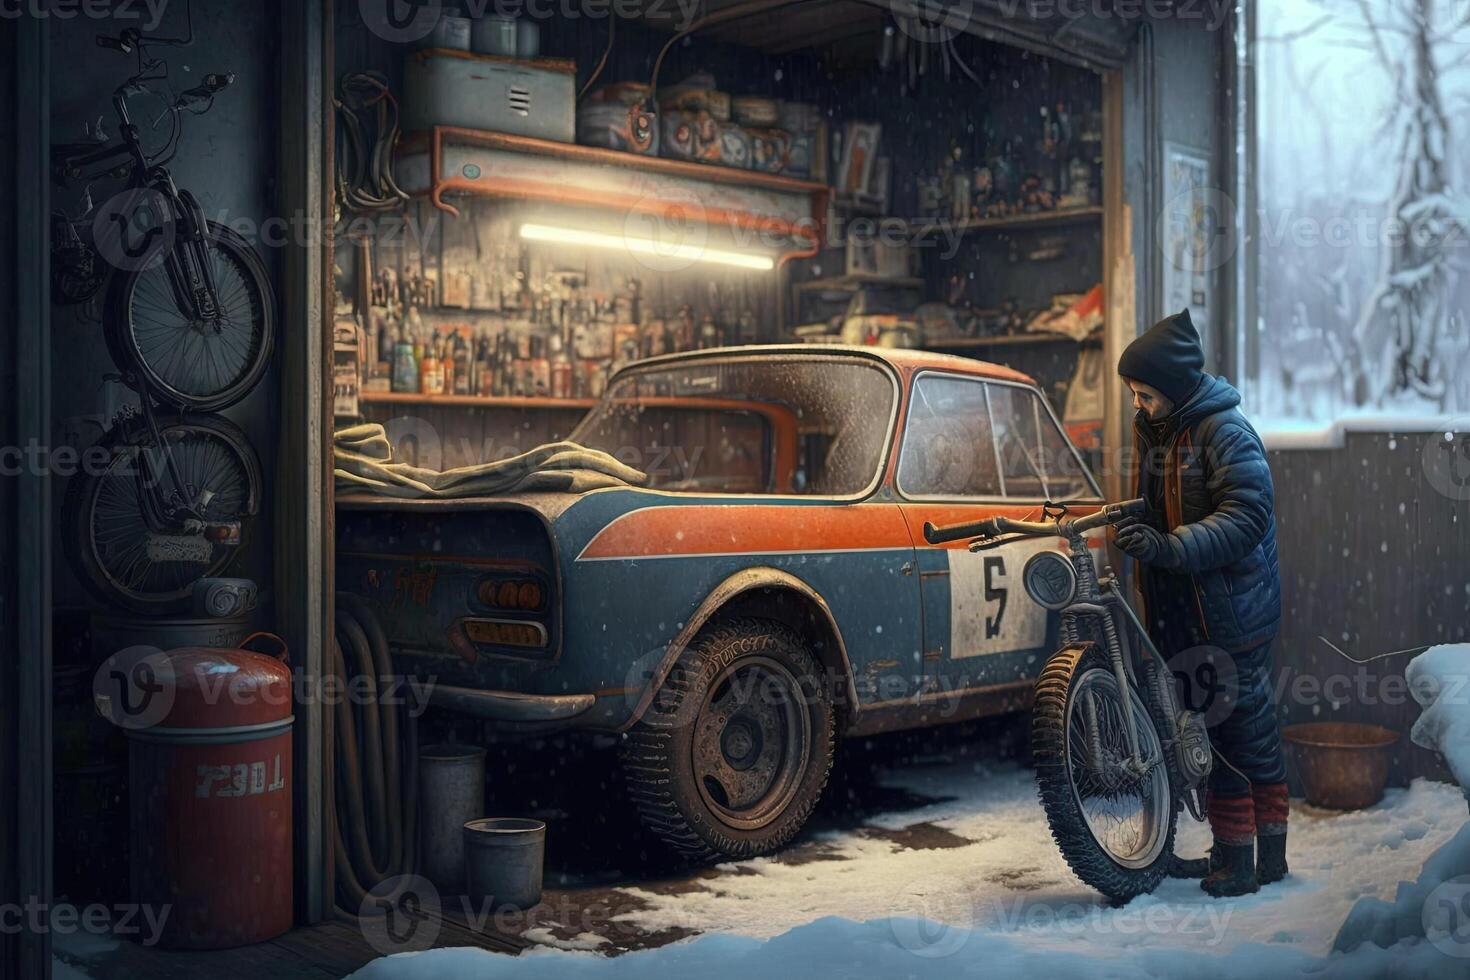 big tire in a garage, WINTER COLD AND SNOW OUTSIDE illustration photo